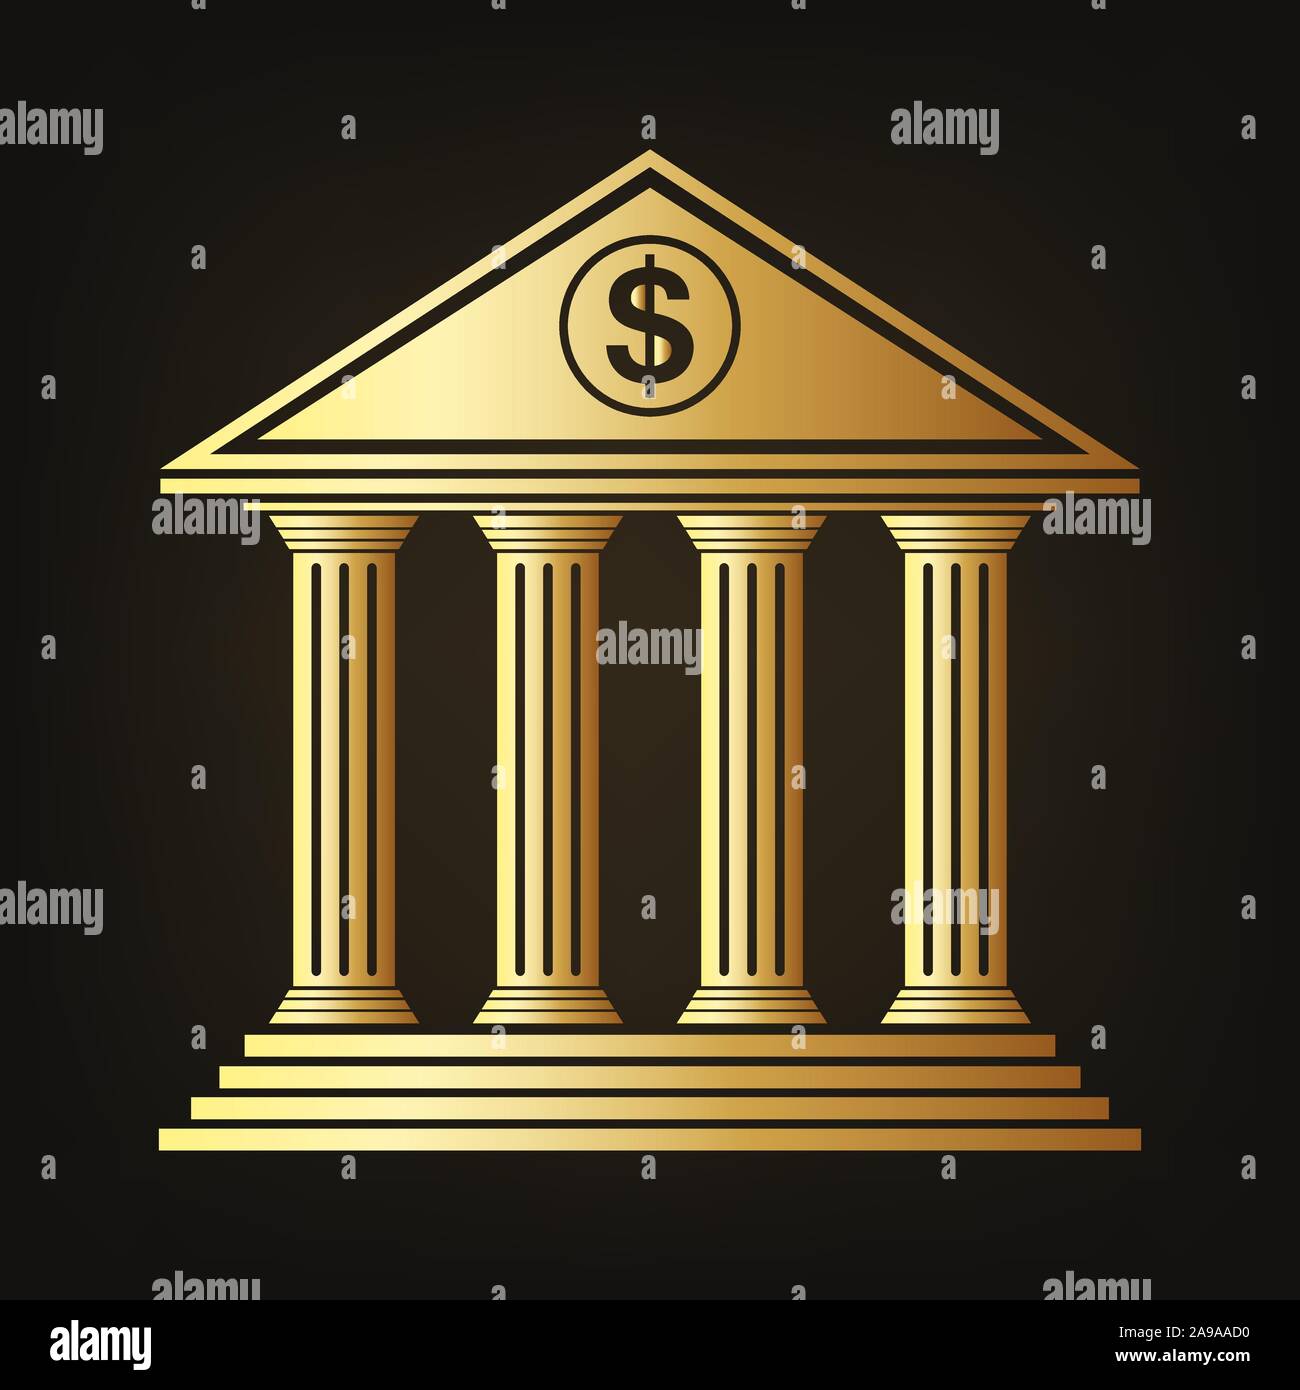 Gold building of the bank icon. Vector illustration. Gold commercial building sign on dark background. Stock Vector